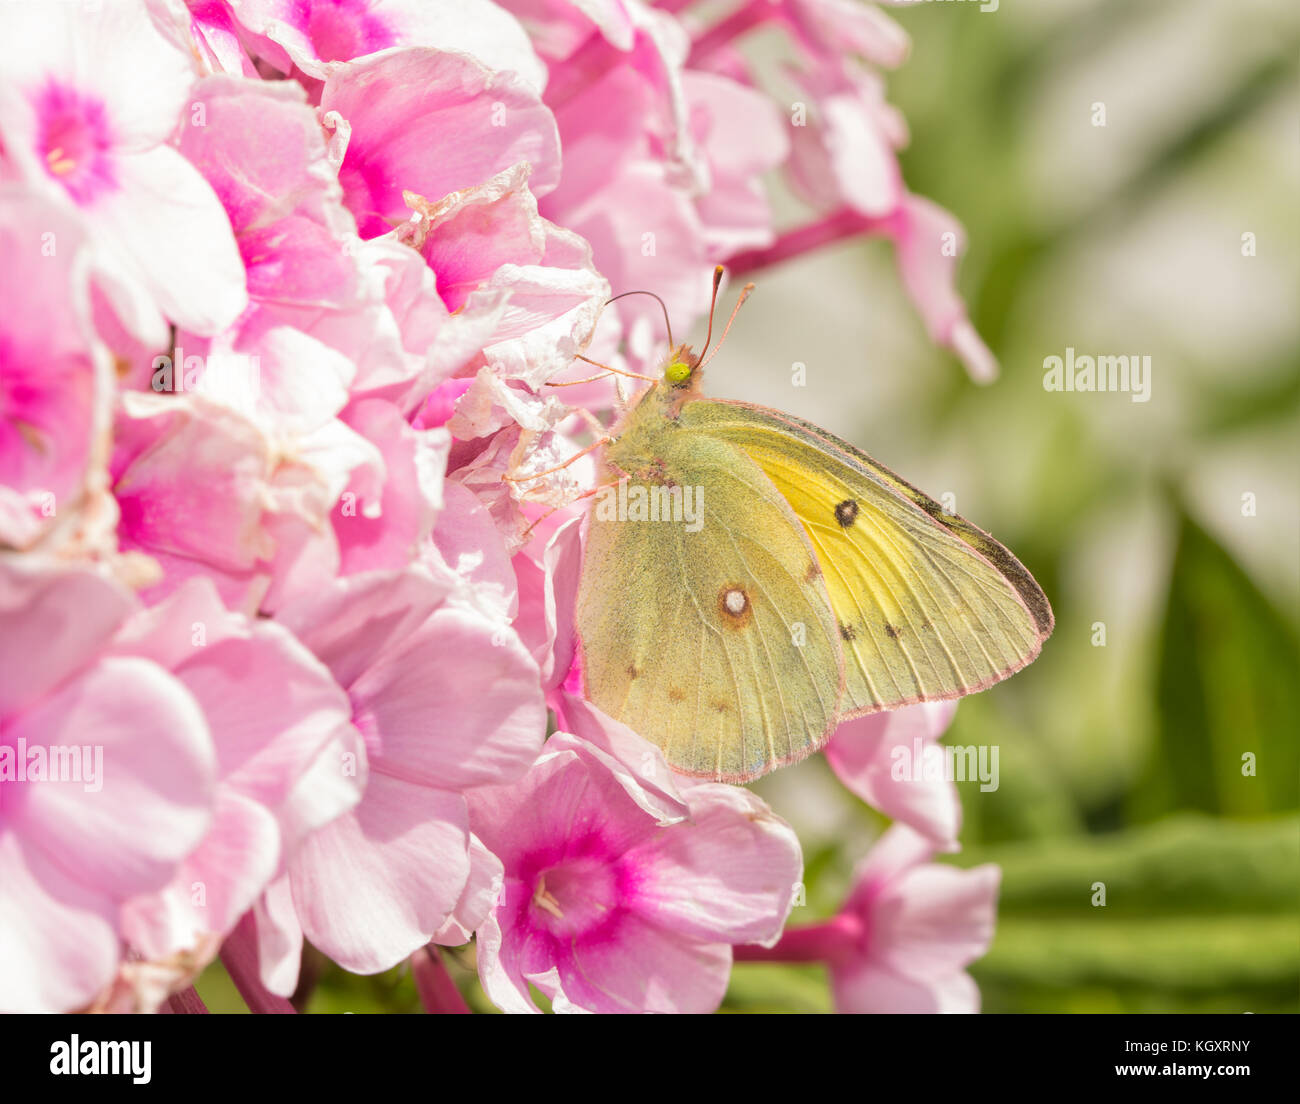 Beautiful yellow Clouded Sulphur butterfly feeding on pink Phlox flowers Stock Photo